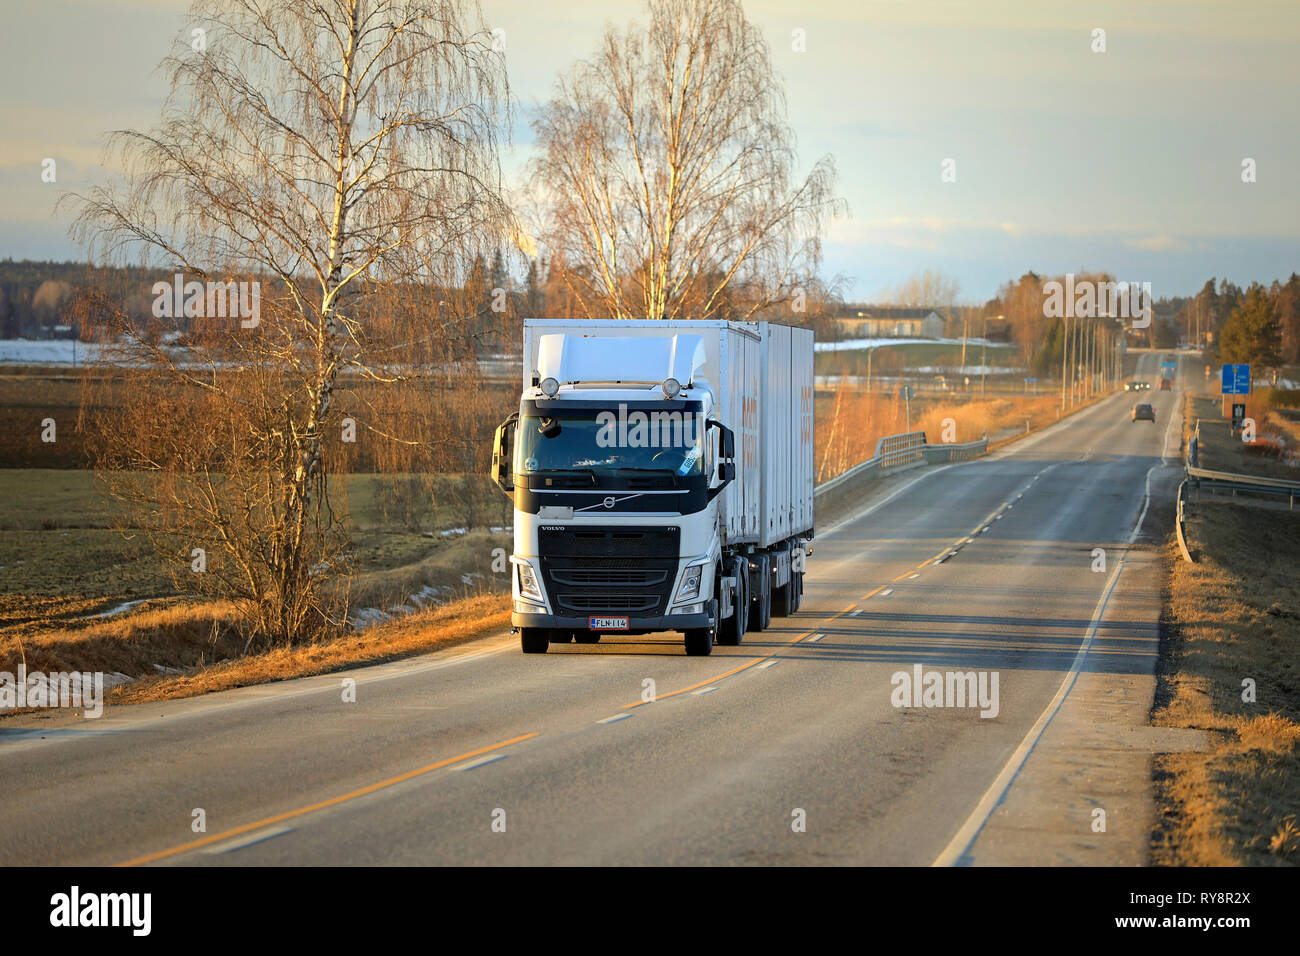 Salo, Finland - March 1, 2019: White Volvo FH truck double trailer for Posti Group, Finnish postal service on highway at sunset time in early spring. Stock Photo